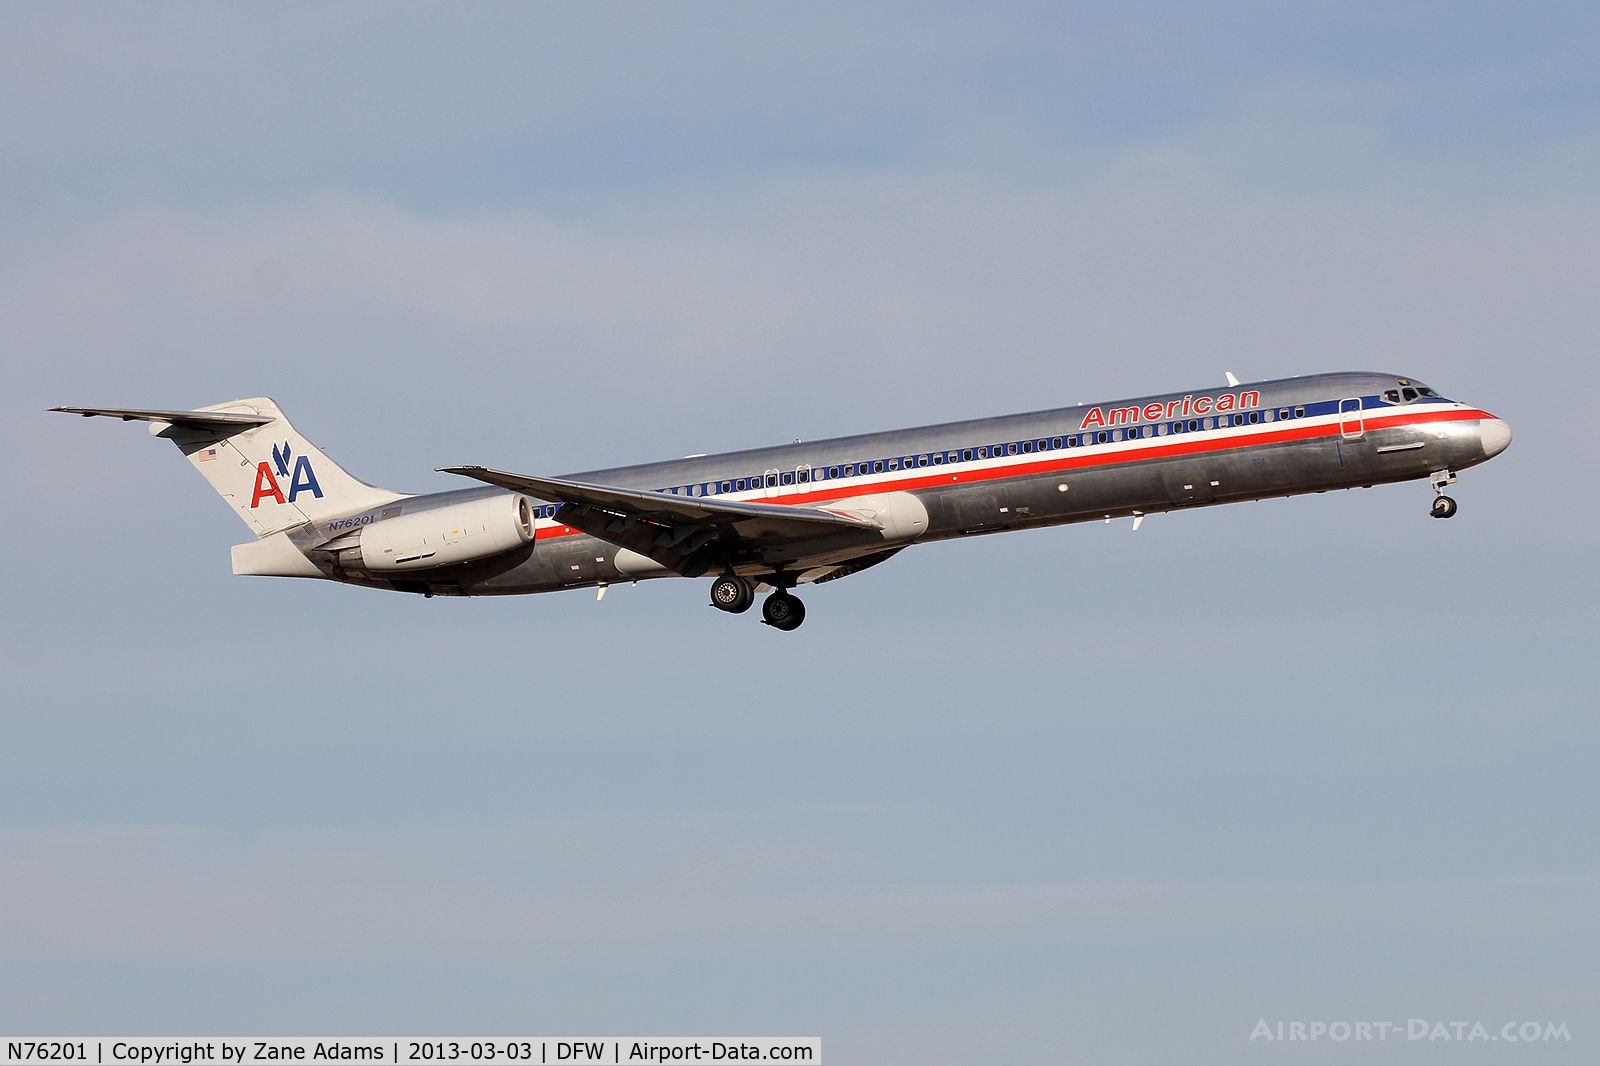 N76201, 1992 McDonnell Douglas MD-83 (DC-9-83) C/N 53291, American Airlines at DFW Airport